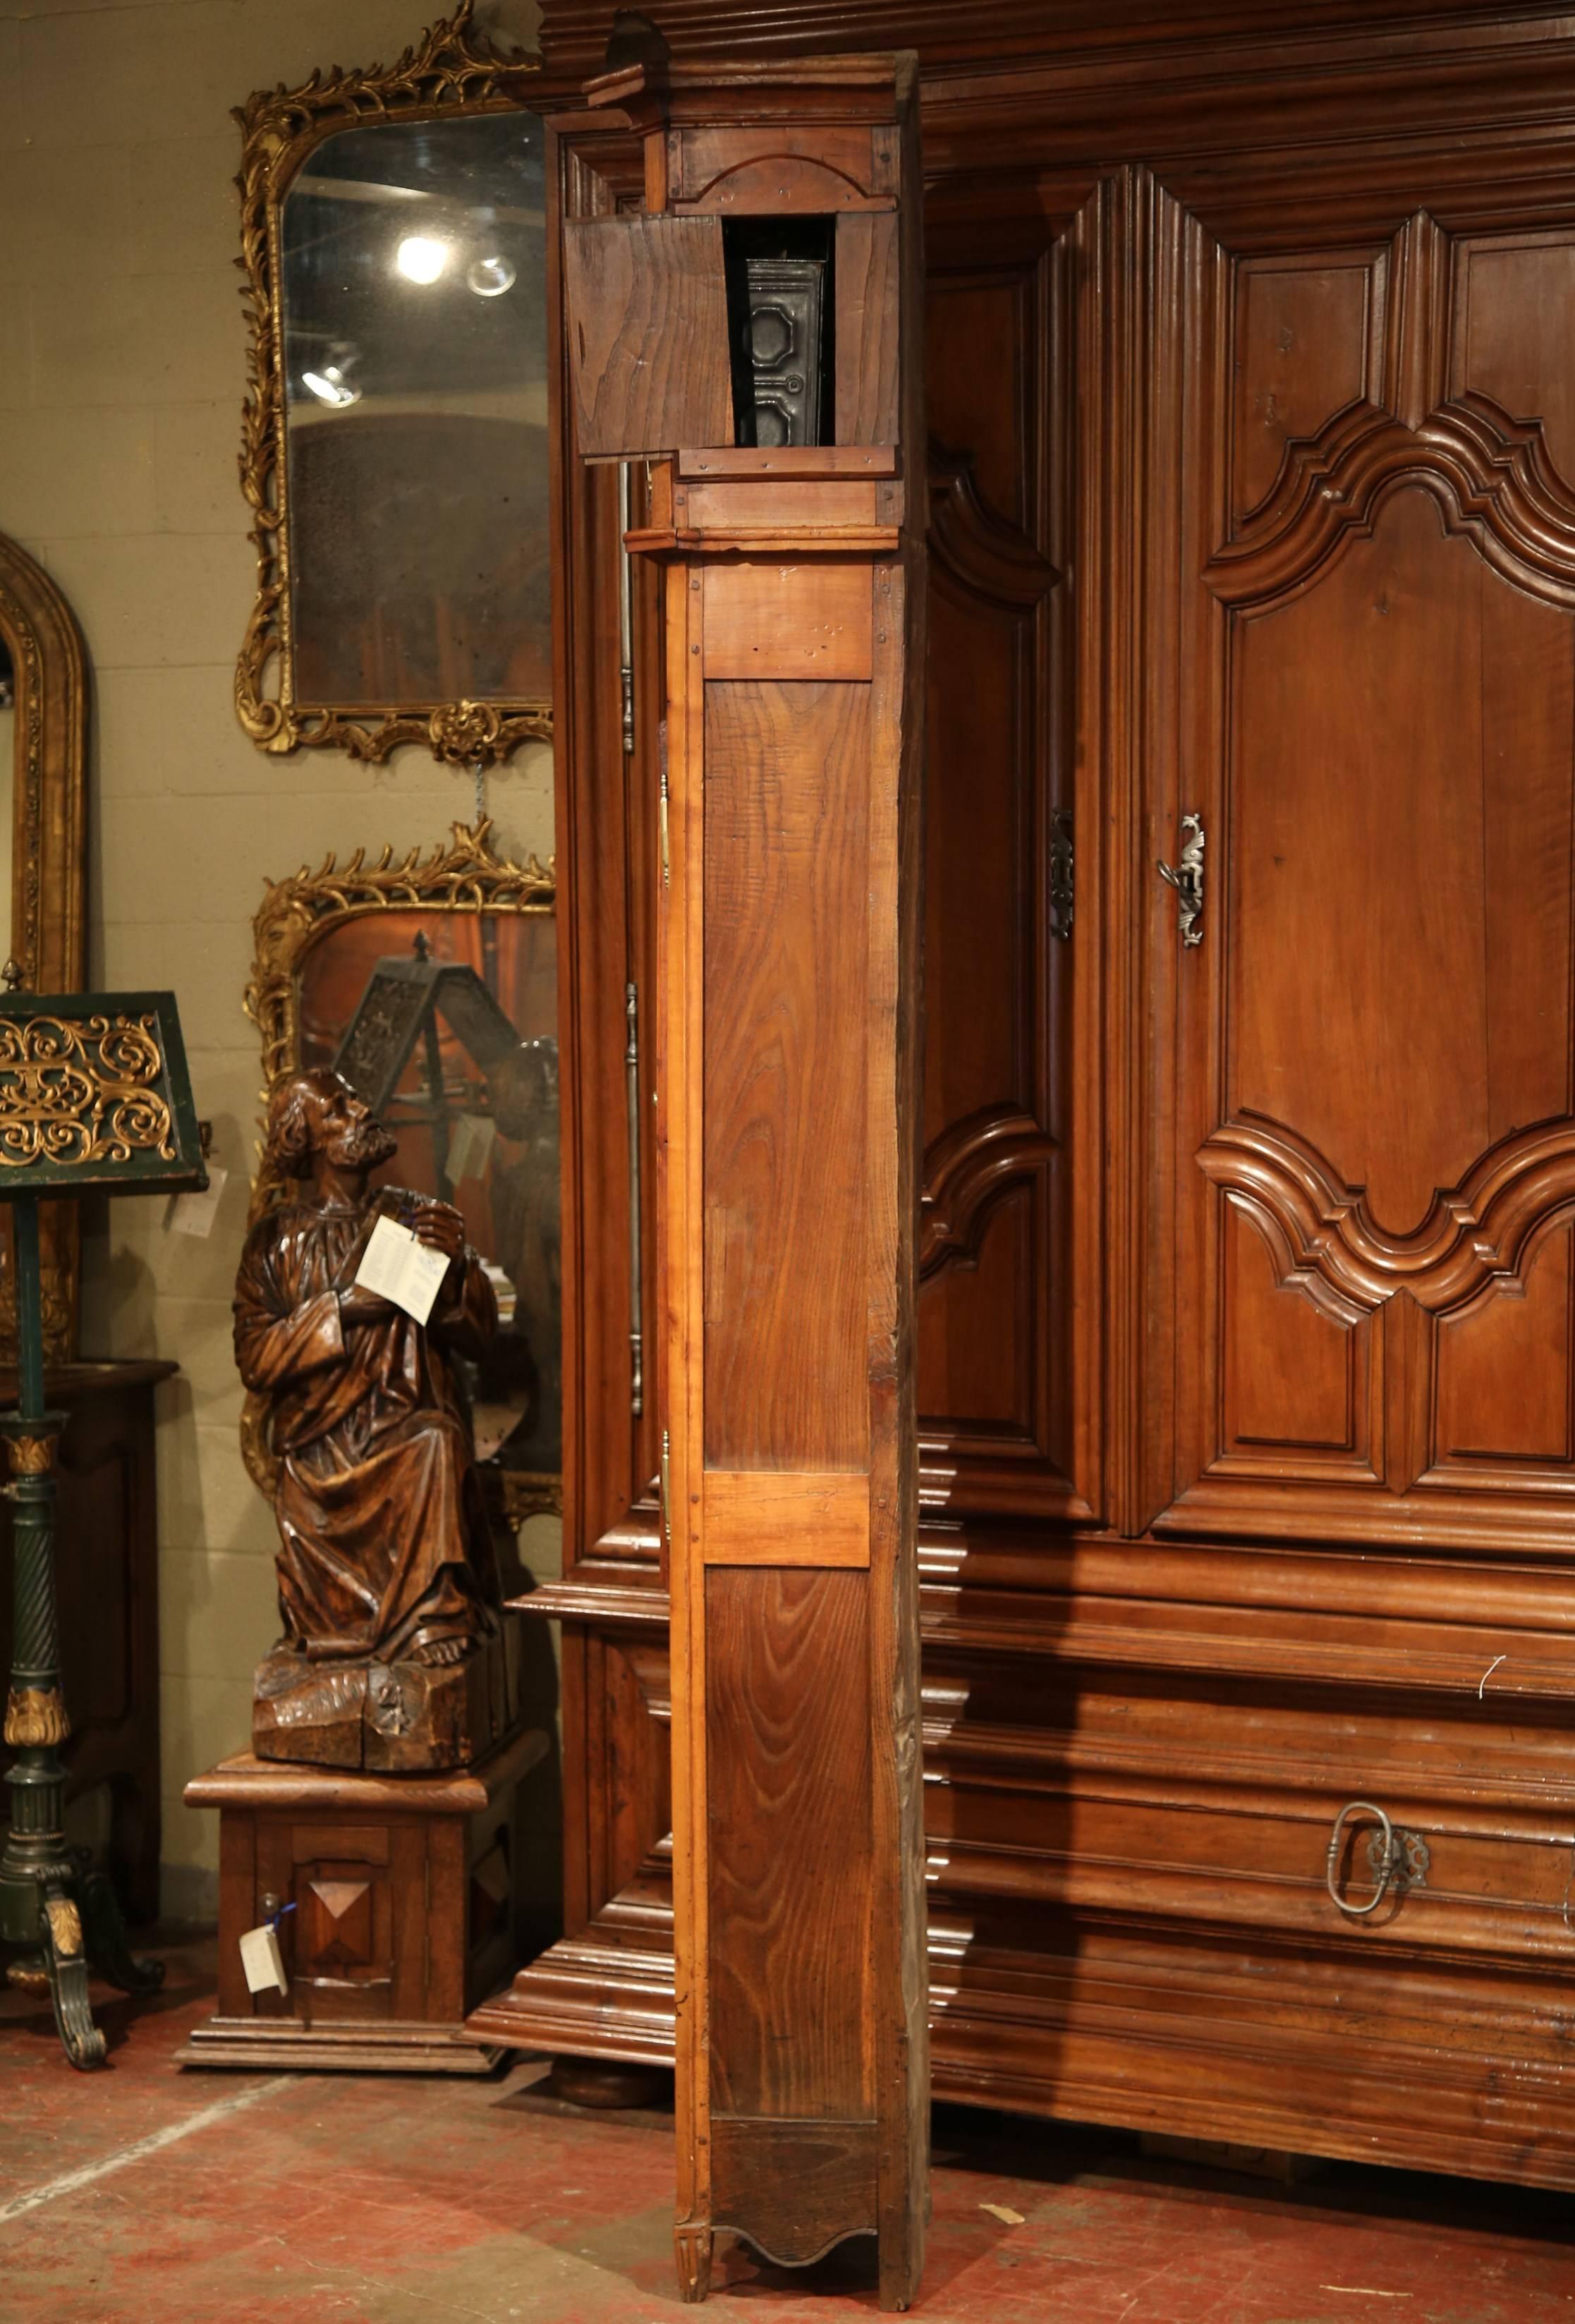  18th Century, French, Louis XV Carved Walnut Tall Case Clock with Inlay Design 4